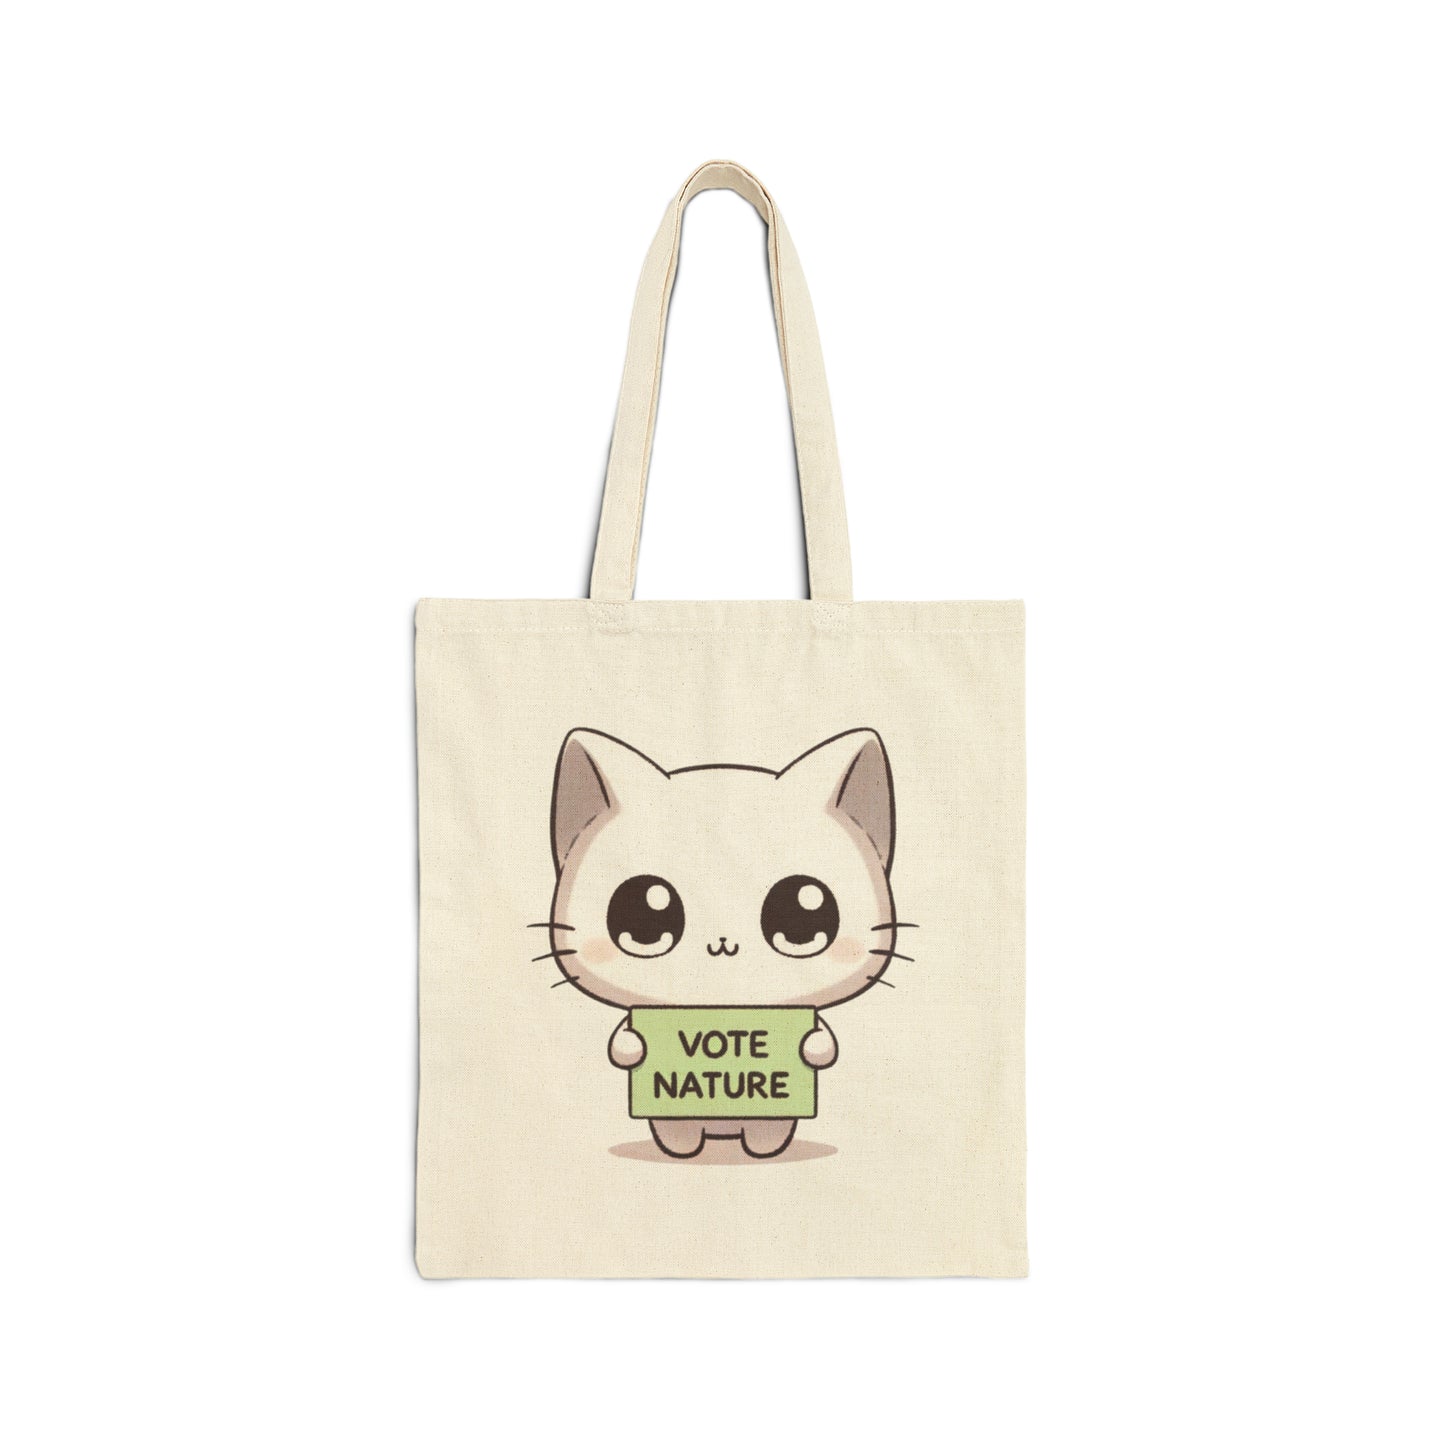 Inspirational Cute Cat Statement Cotton Canvas Tote Bag: Vote Nature! carry a laptop, kindle, phone, notebook, goodies to work/coffee shop